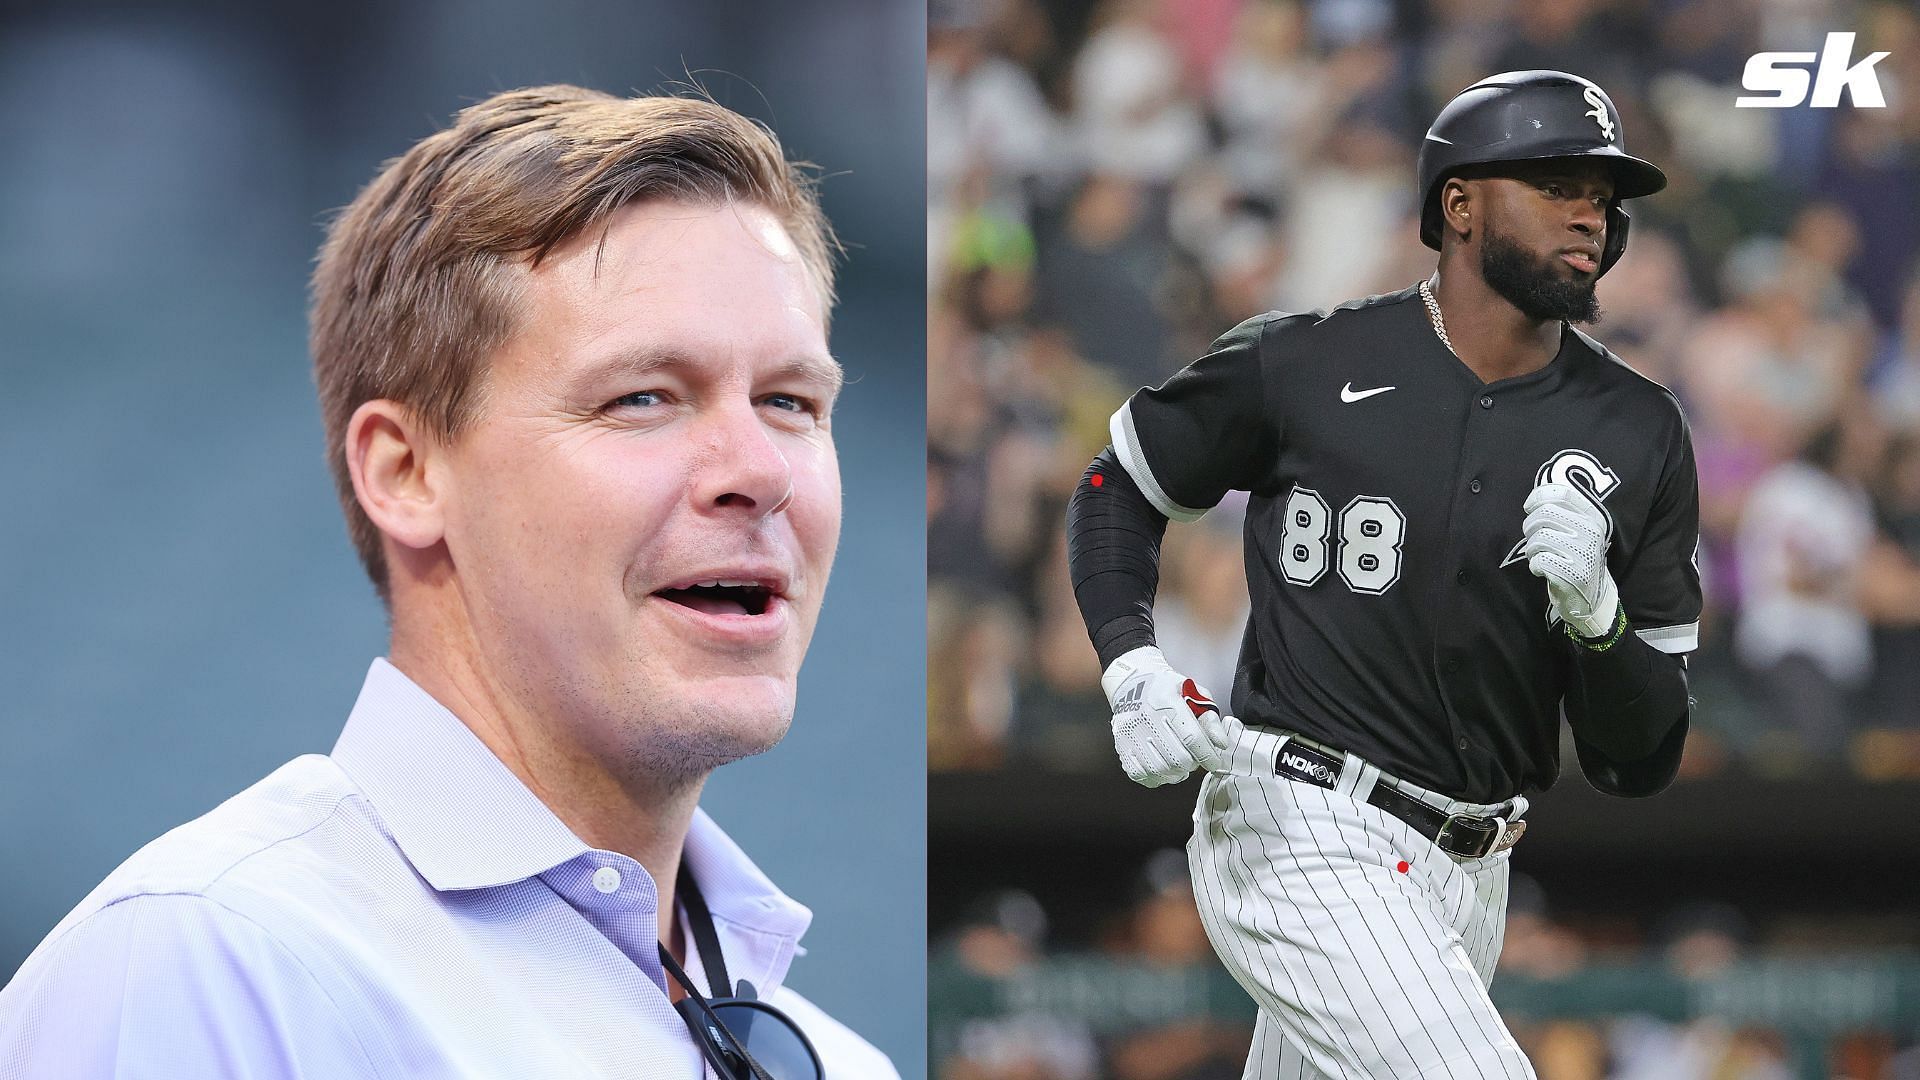 Chicago White Sox GM Chris Getz is not ruling out any of his players in a potential trade deal